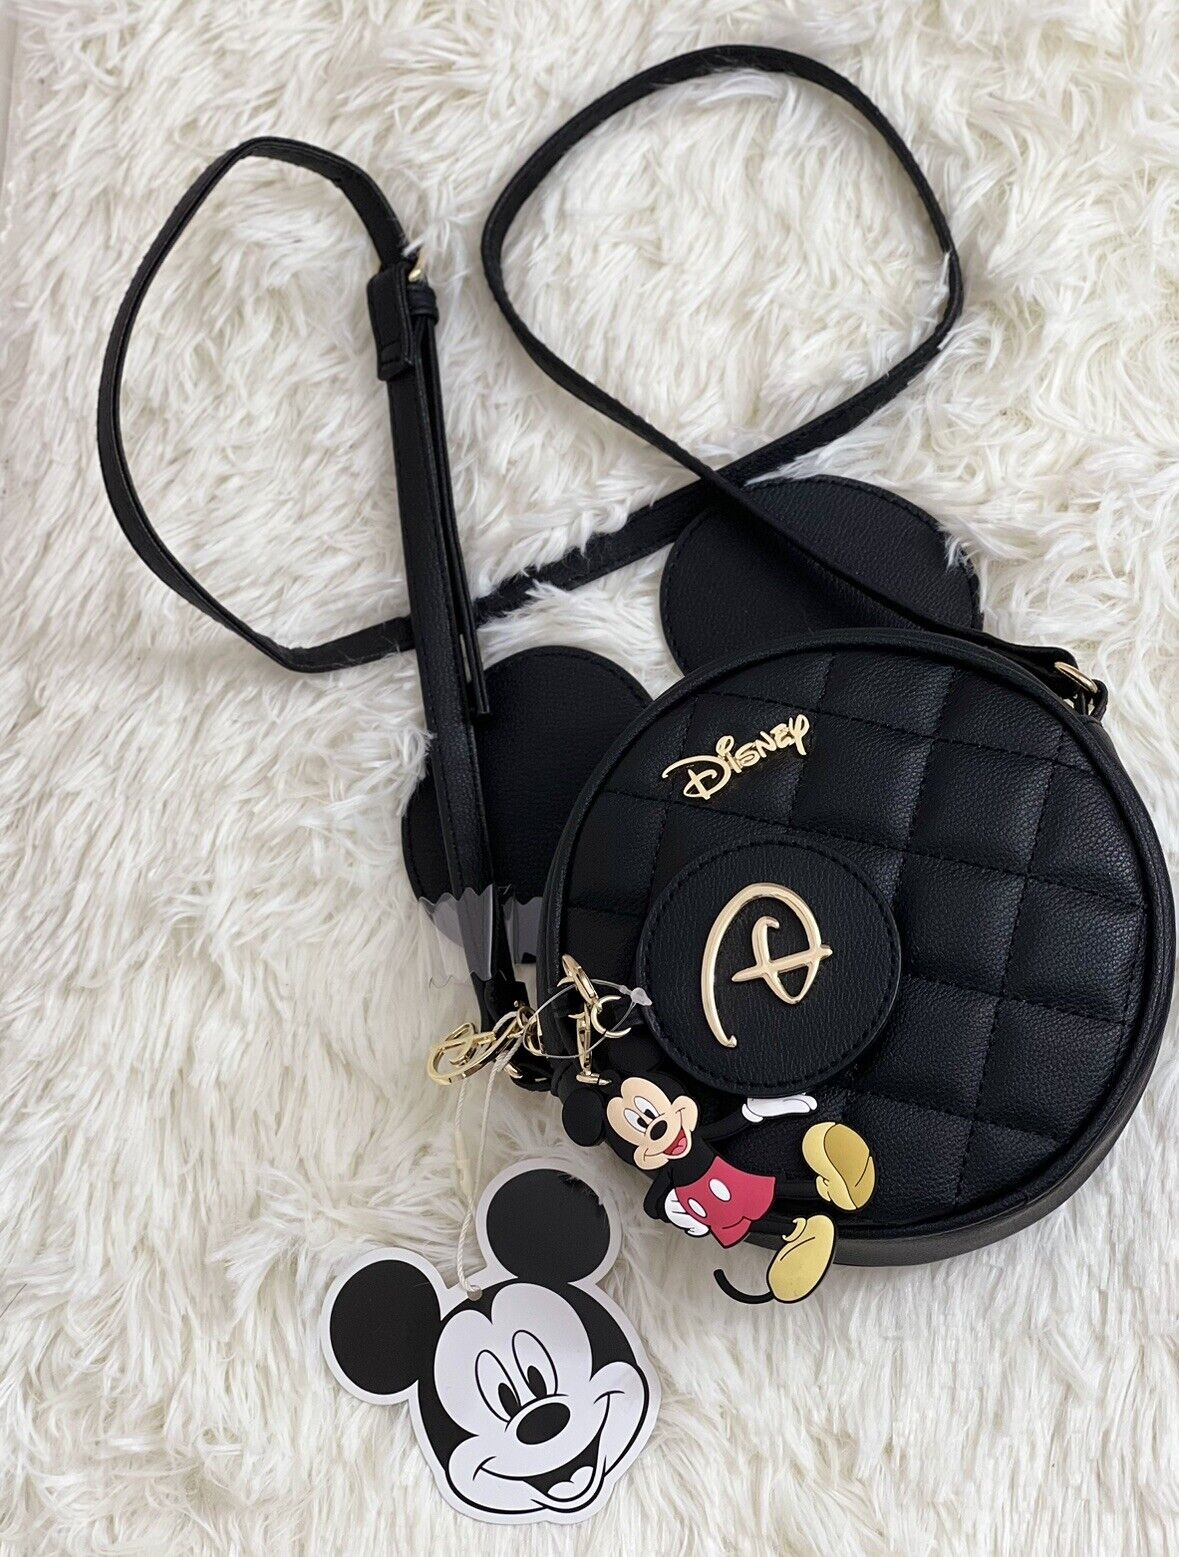 Disney Mickey Mouse Ears Round Crossbody Purse Bag with Charms Primark NWT